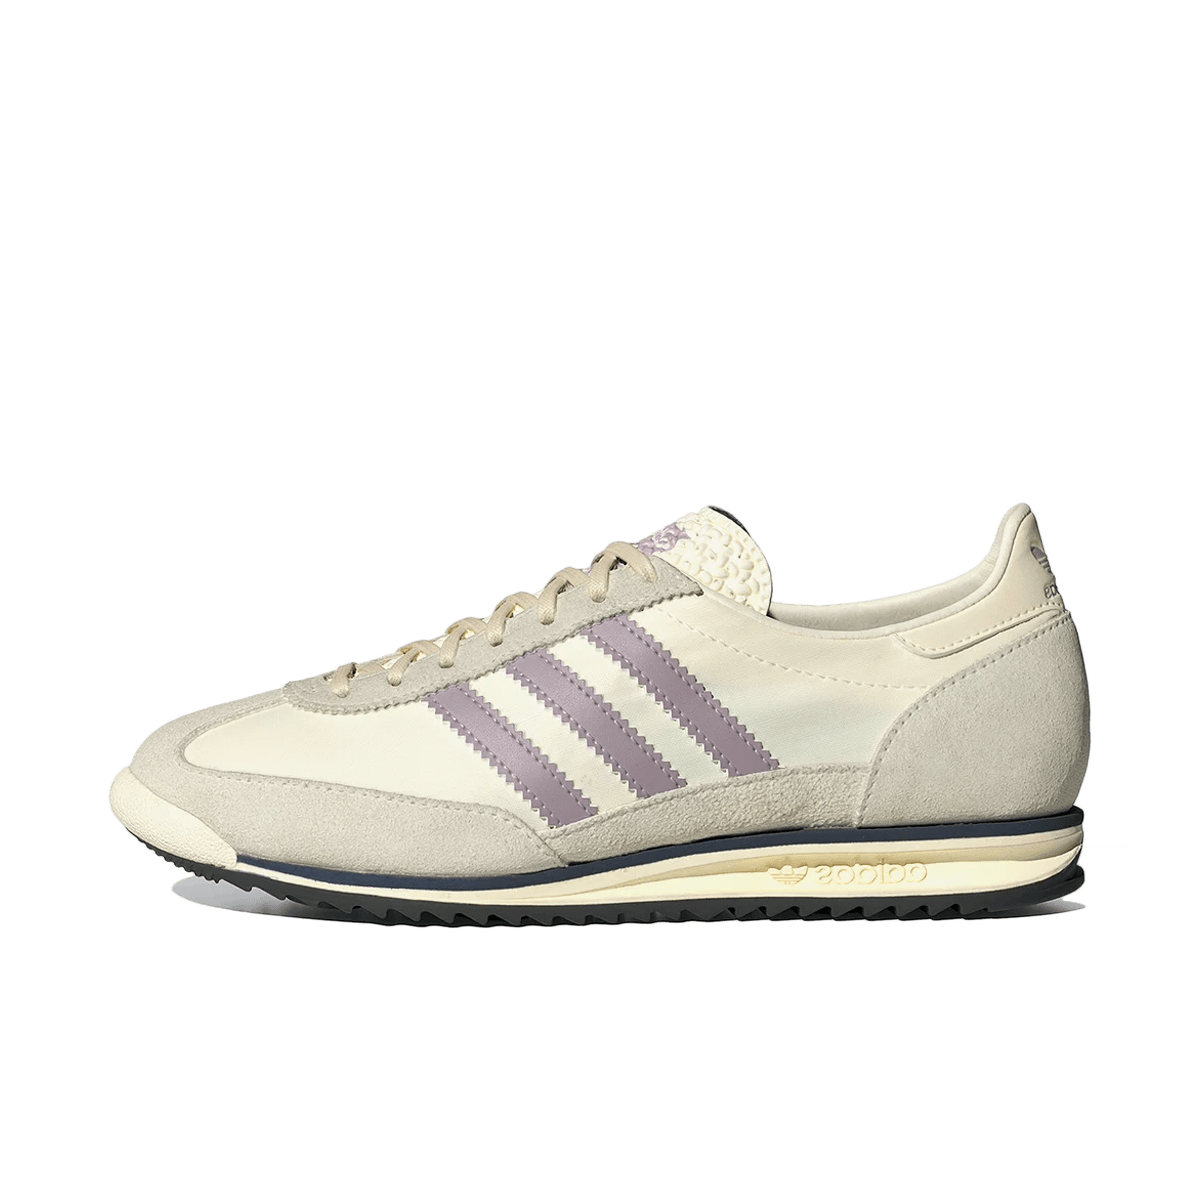 adidas SL 72 'Almost Pink' IE3428